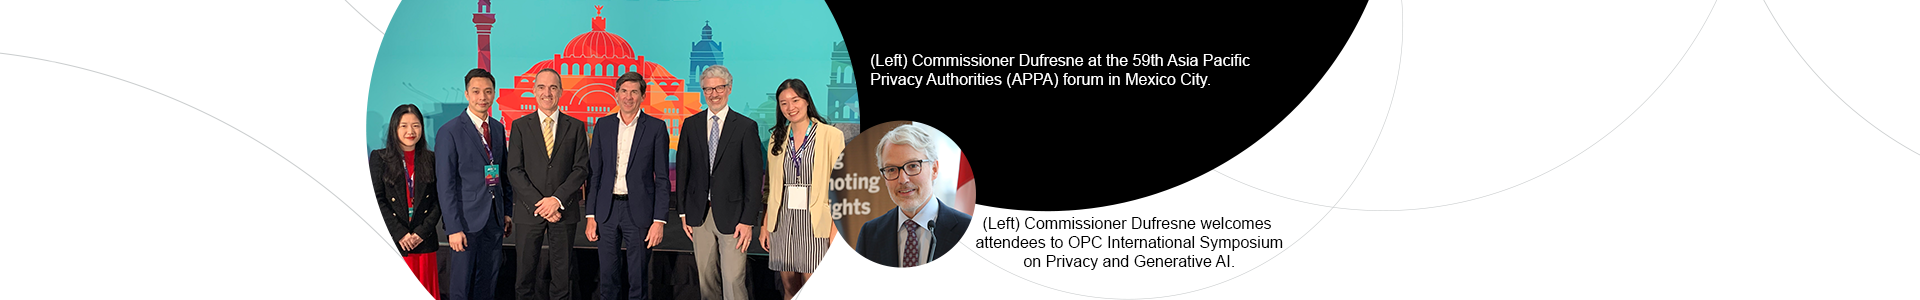 Commissioner Dufresne at the 59th Asia Pacific Privacy Authorities (APPA) forum; Commissioner welcomes attendees to OPC International Symposium on Privacy and Generative AI; and photos of Symposium panelists and participants.